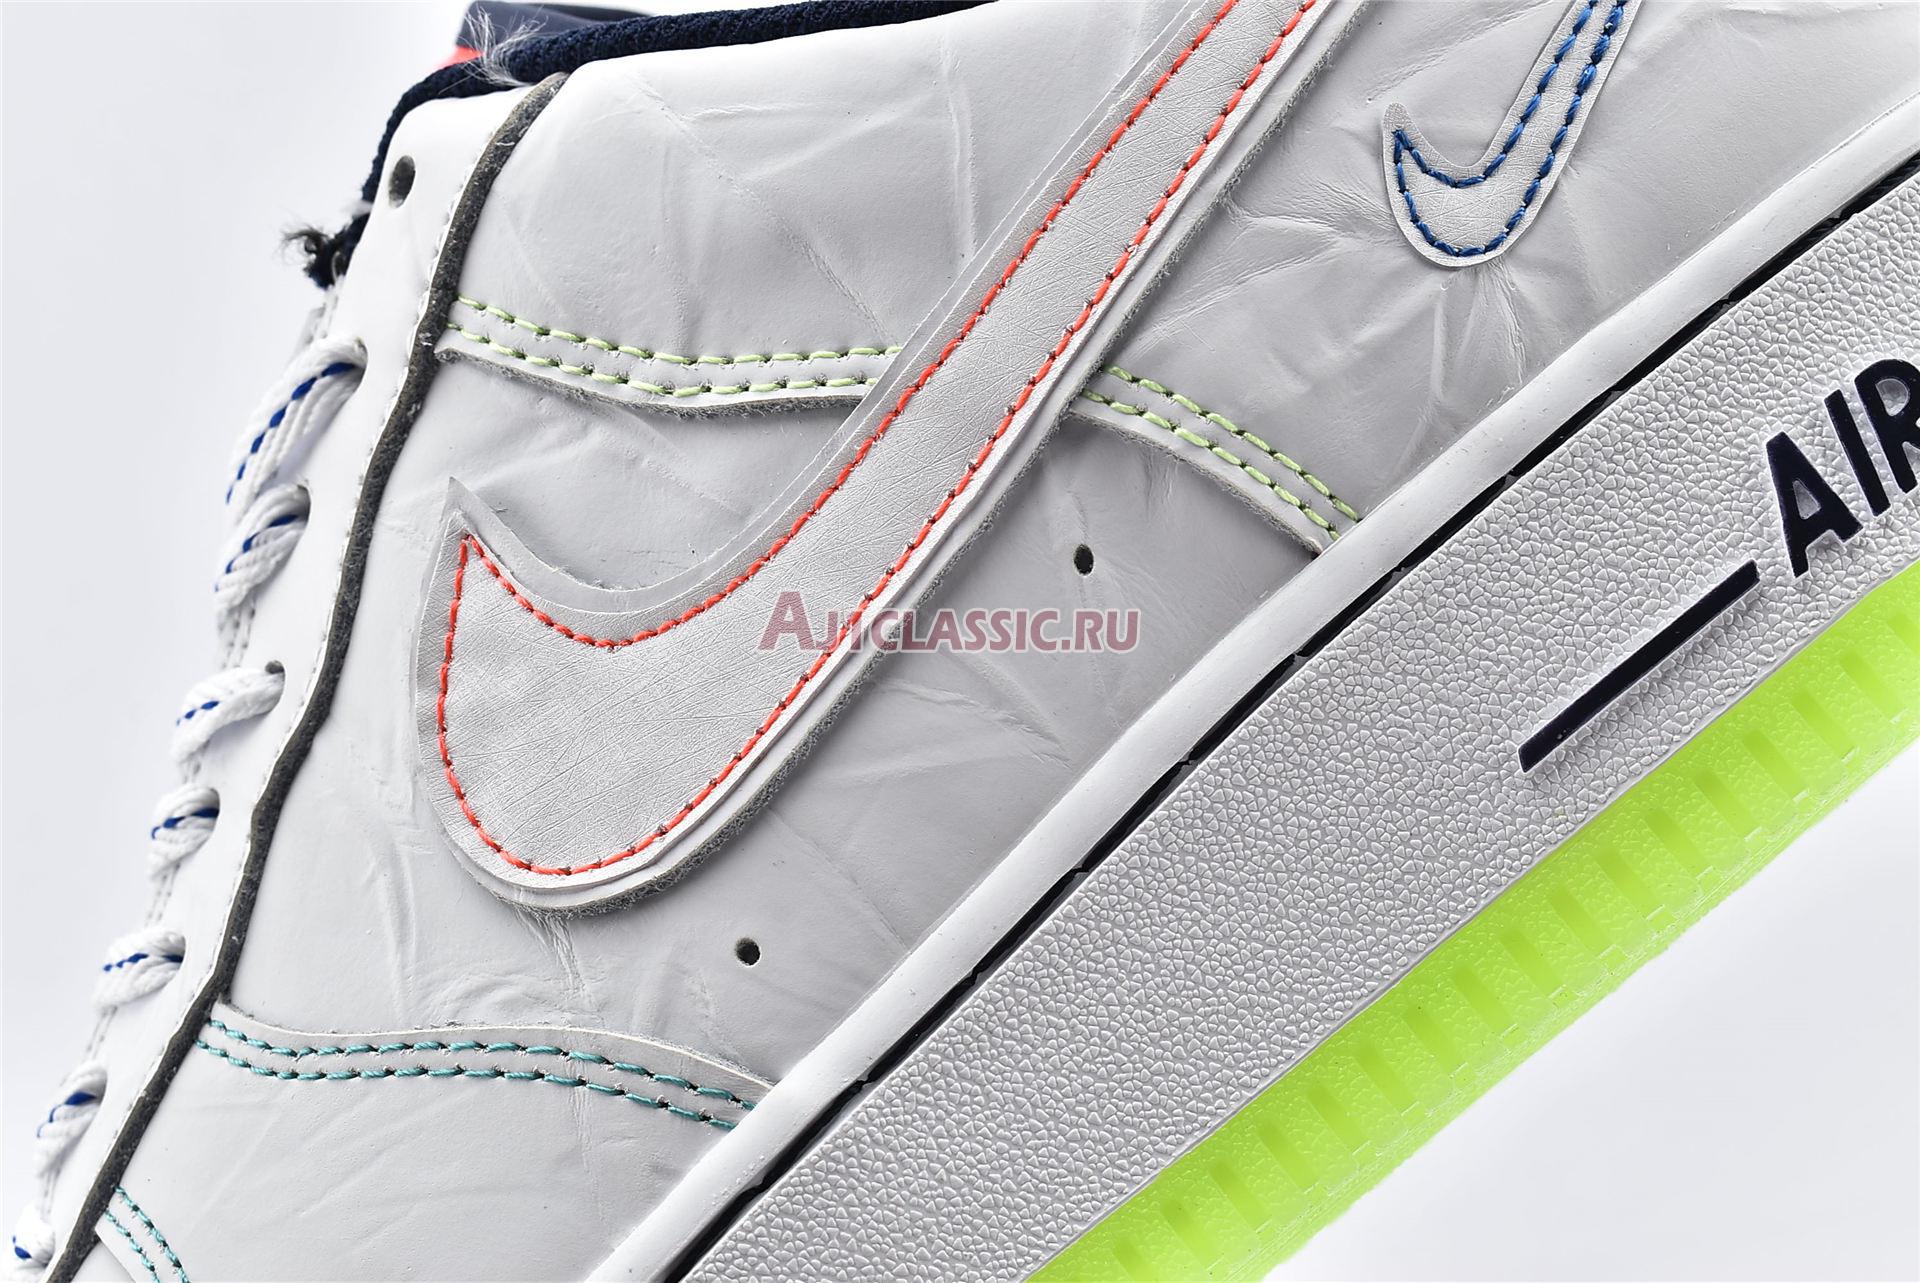 Nike Air Force 1 Low BG "Outside the Lines" CV2421-100